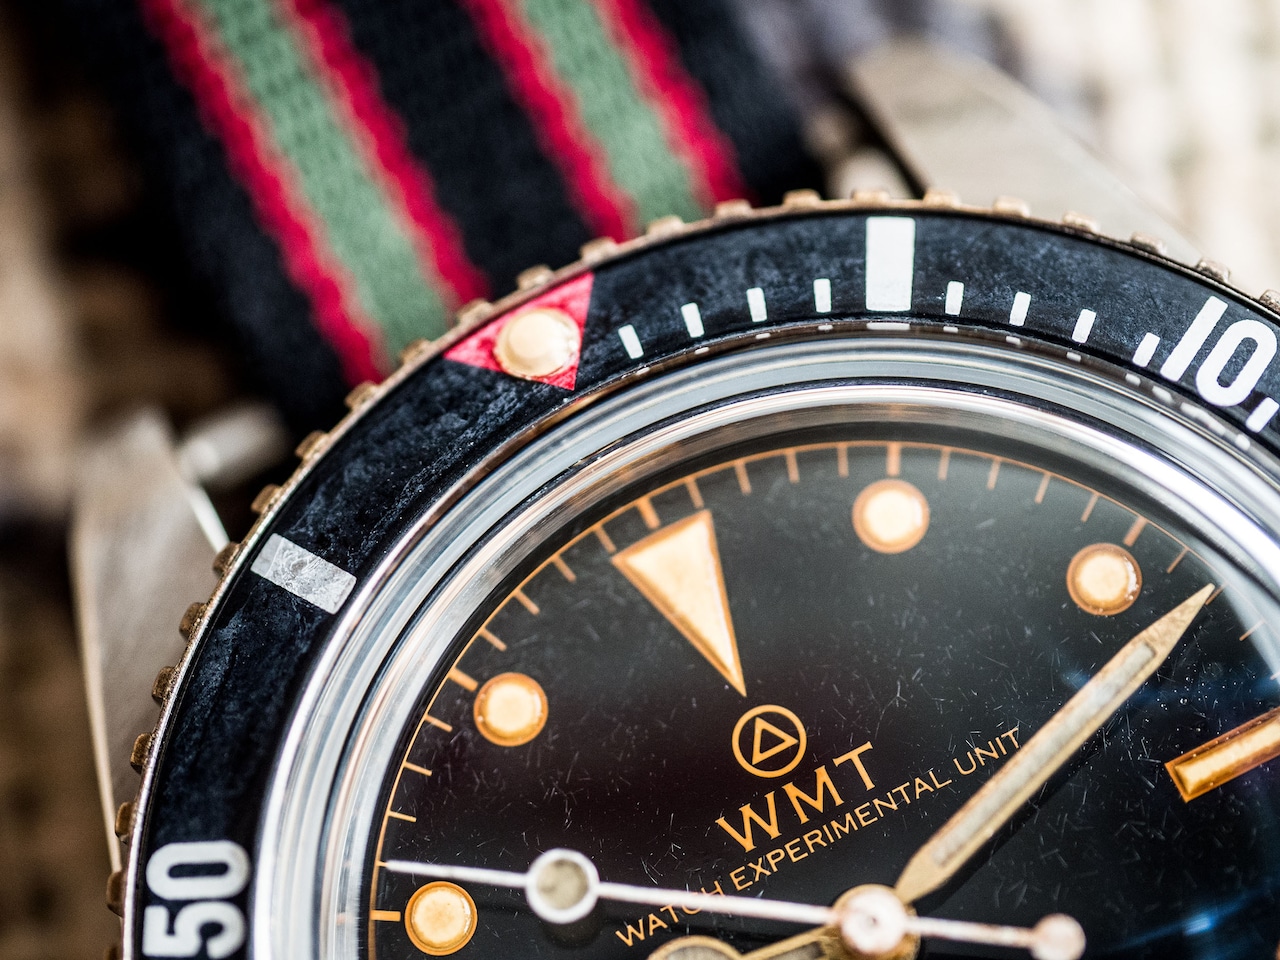 WMT WATCHES Sea Diver – ” MI6-010B ” Intelligence Agency Special Edition / All Aged With Brass Bezel